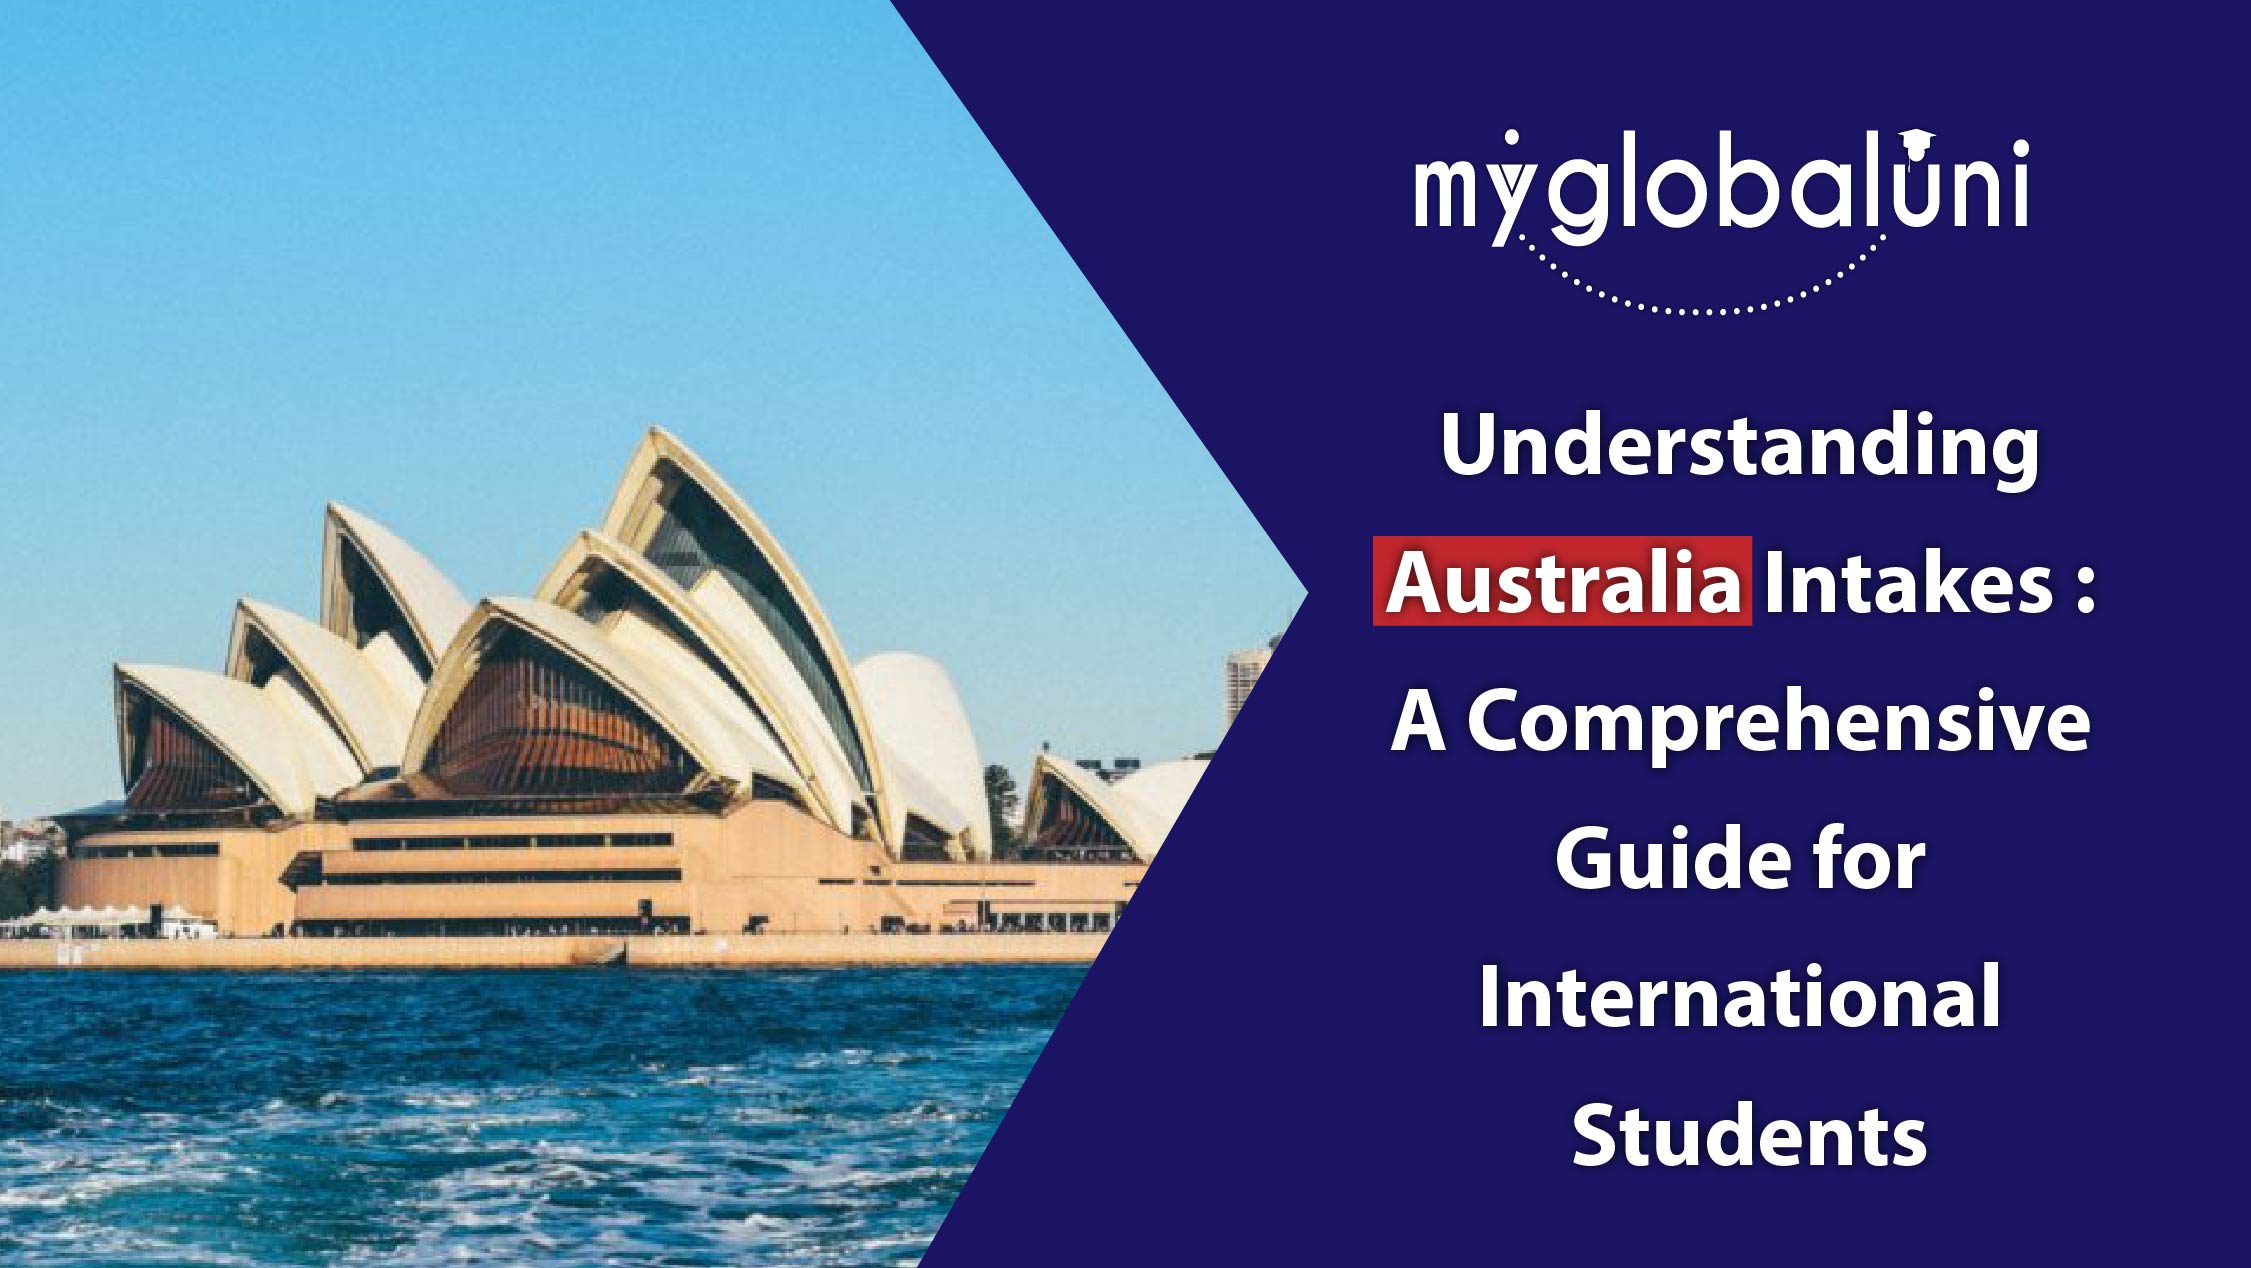 Understanding Australia's Intake | A Comprehensive Guide for International Students